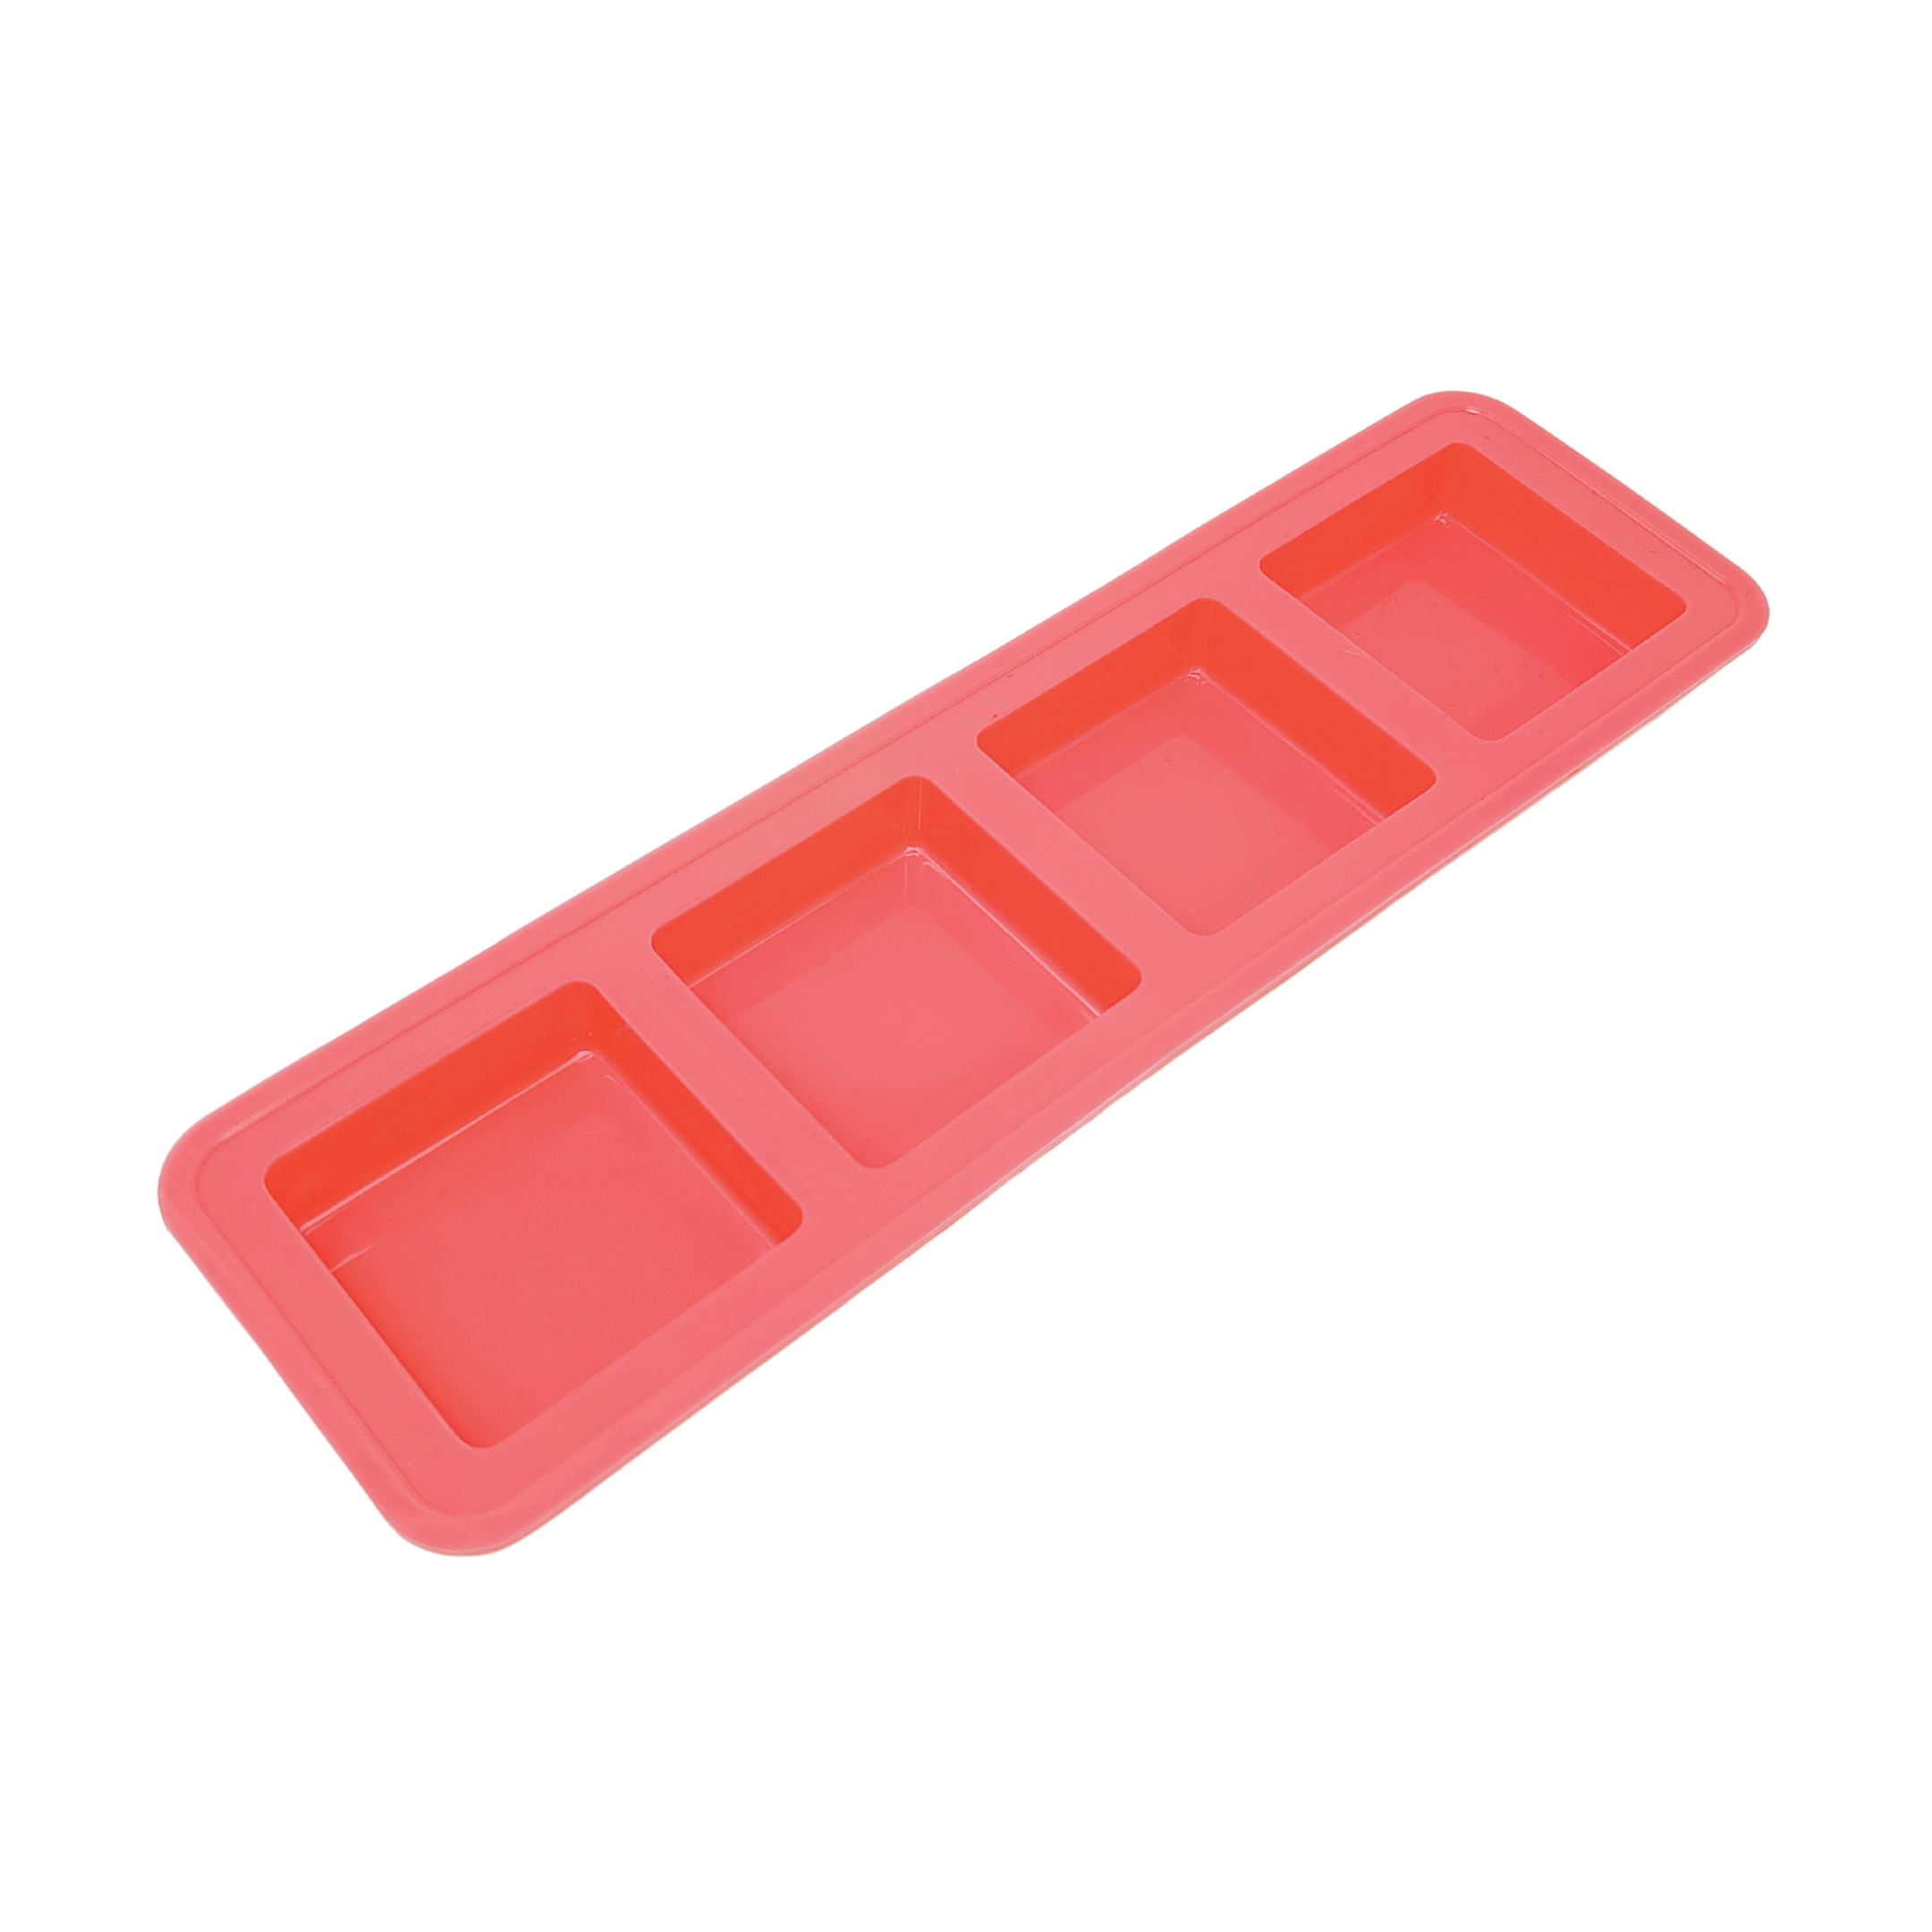 75ml Square Soap Mould - The Mould Story